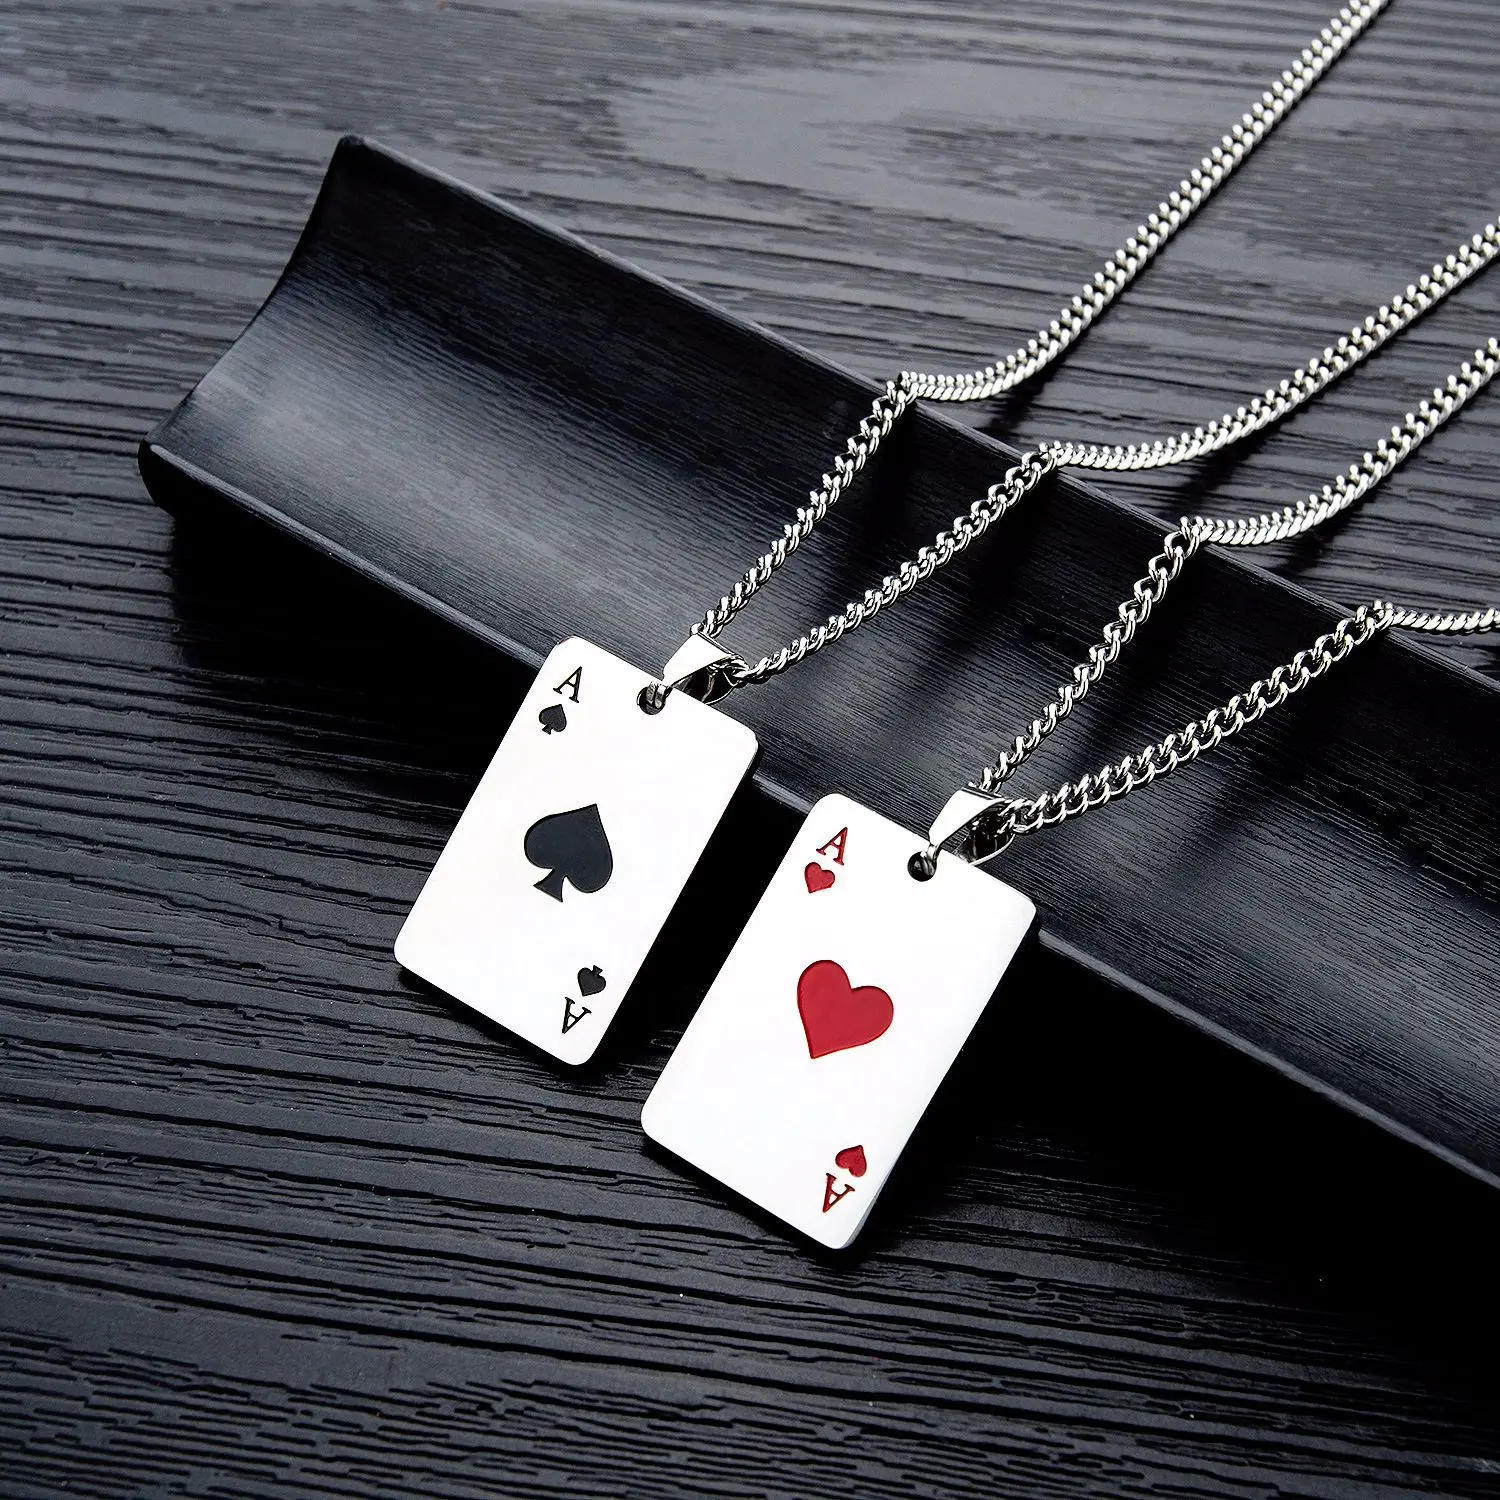 Pendant Necklace Men's Stainless Steel Ace Poker Spades A Queen Hearts Pendant Necklace With Cards Shapes